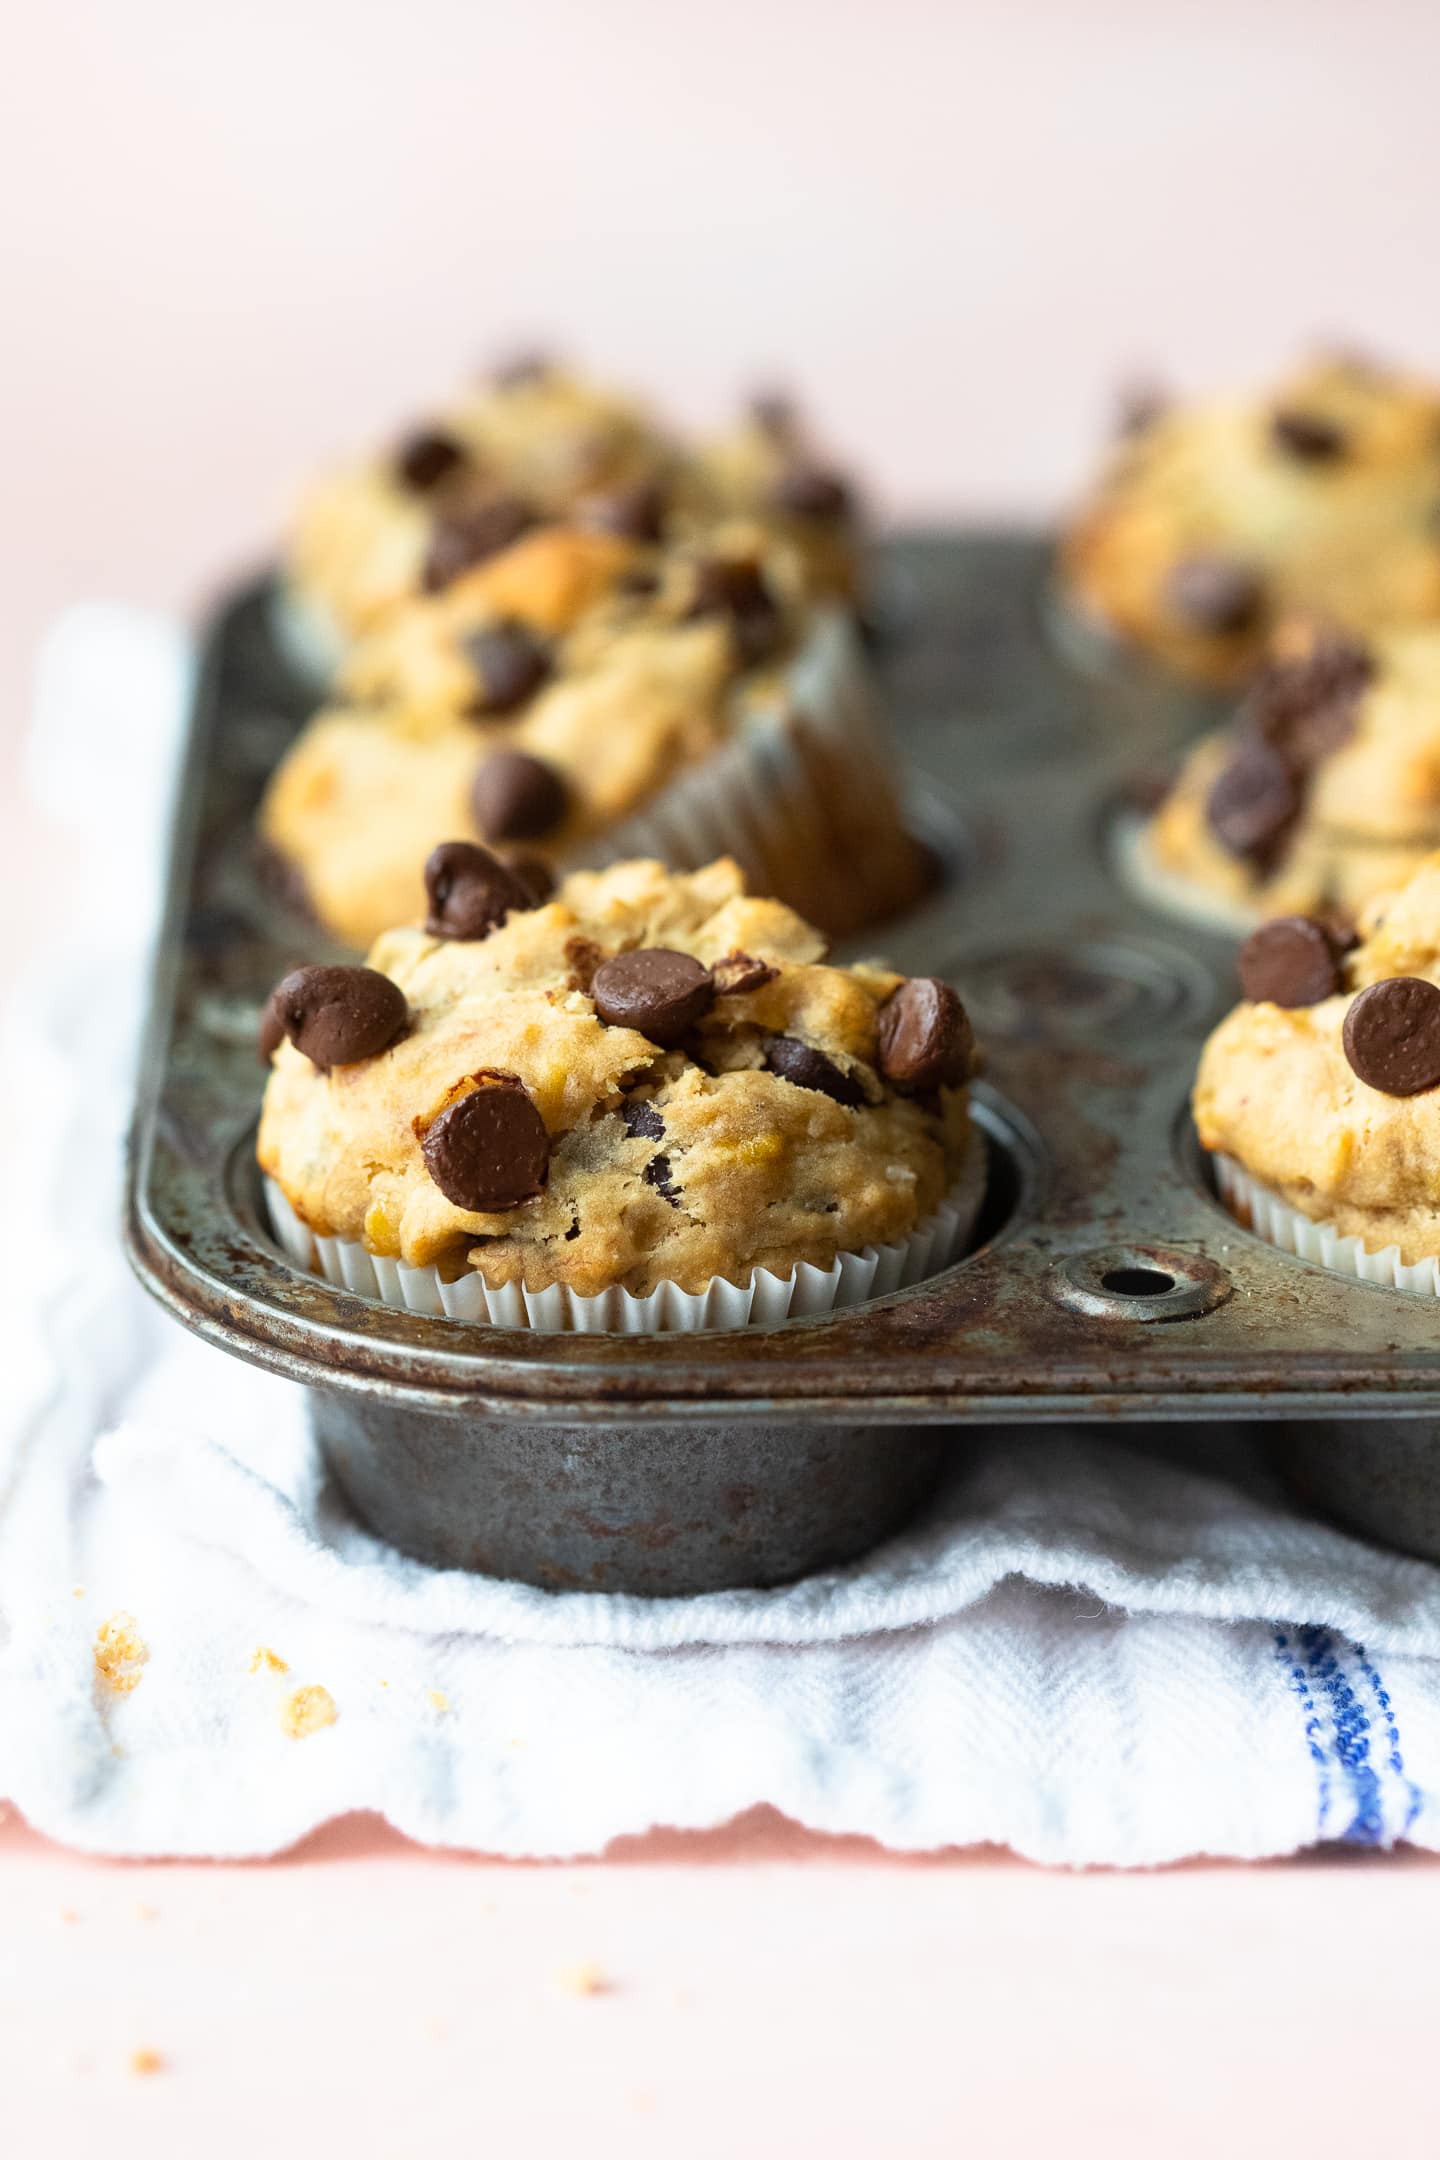 Front-facing view of Peanut Butter Banana Chocolate Chip Muffins in a muffin pan, with a white linen underneath, on a light pink backdrop.